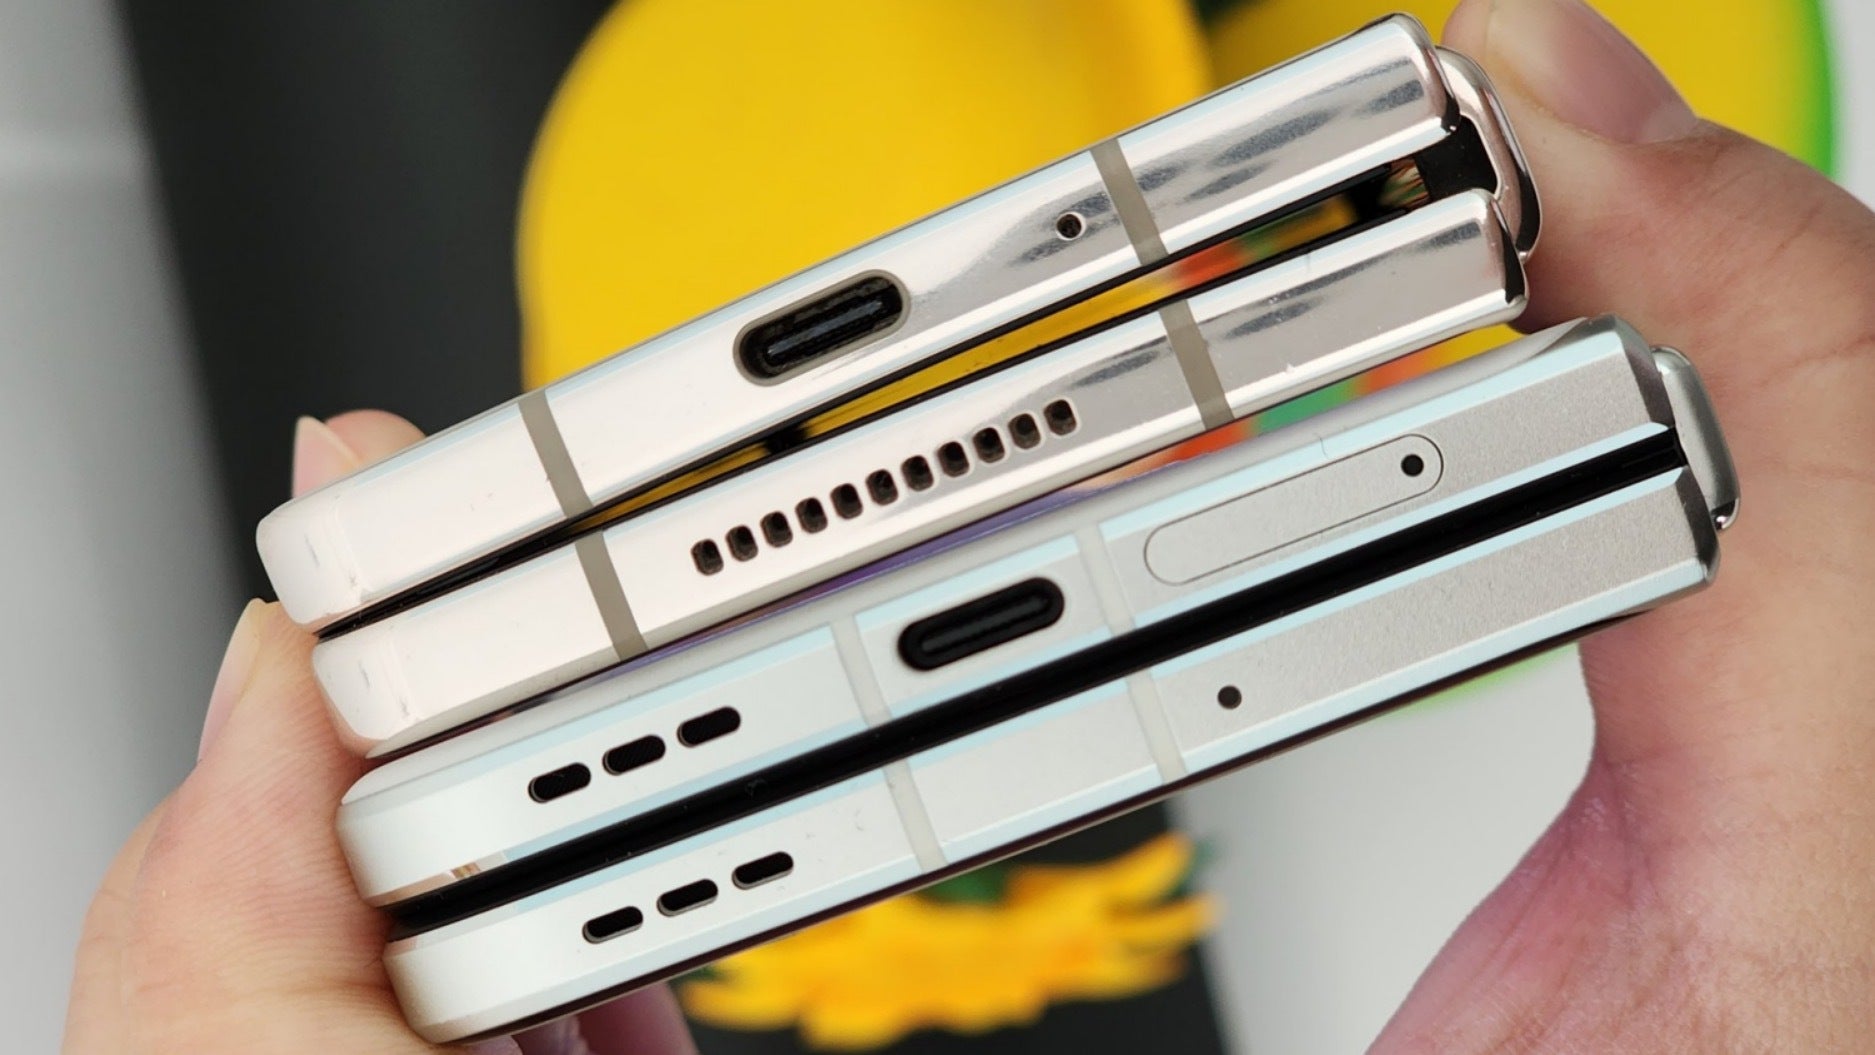 Far from perfect... Unless you live in China. - Rule-bending new foldable champ lighter than iPhone 14 Pro Max; cheaper than Galaxy Z Fold 4!